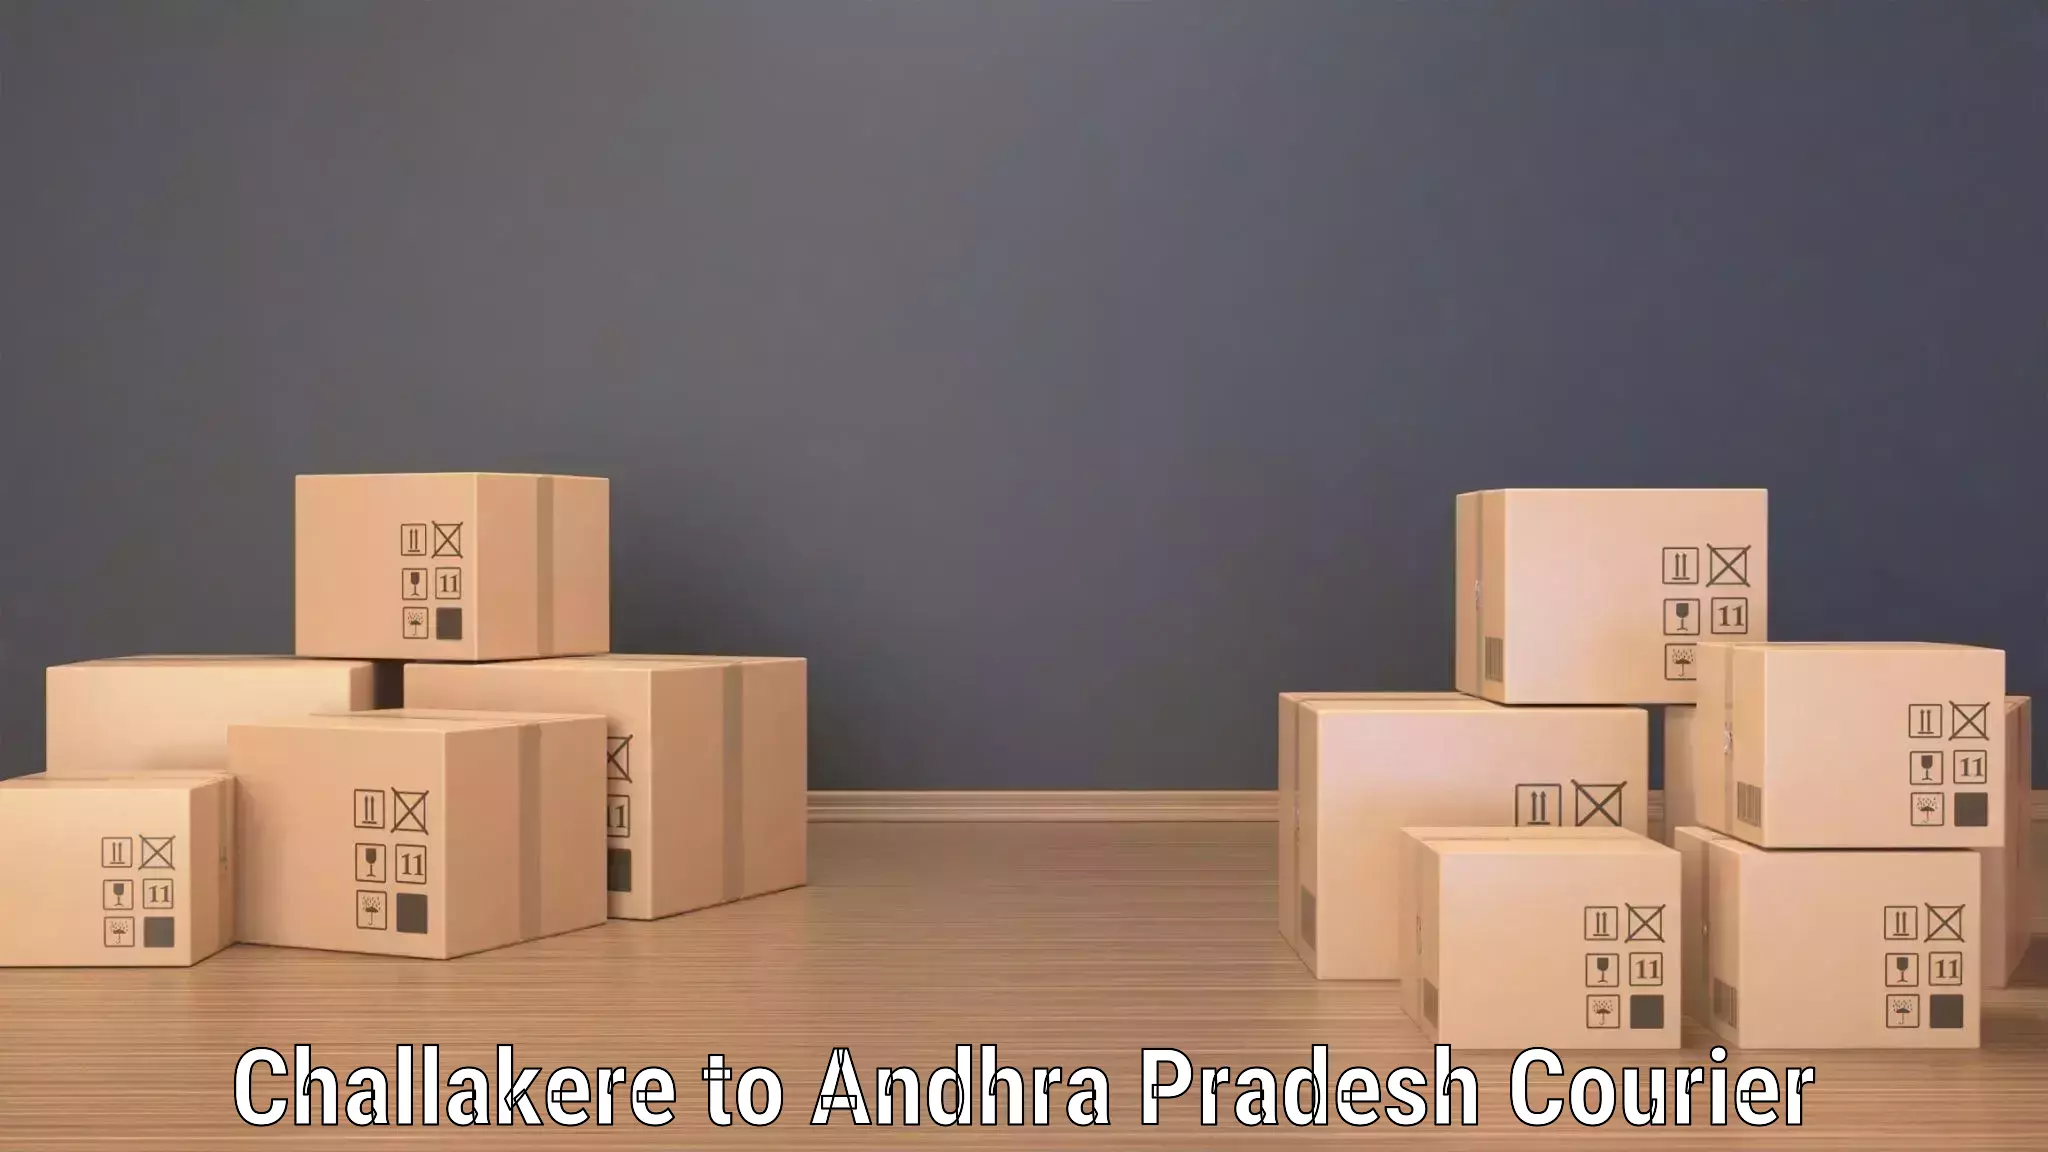 Global shipping networks Challakere to Andhra Pradesh